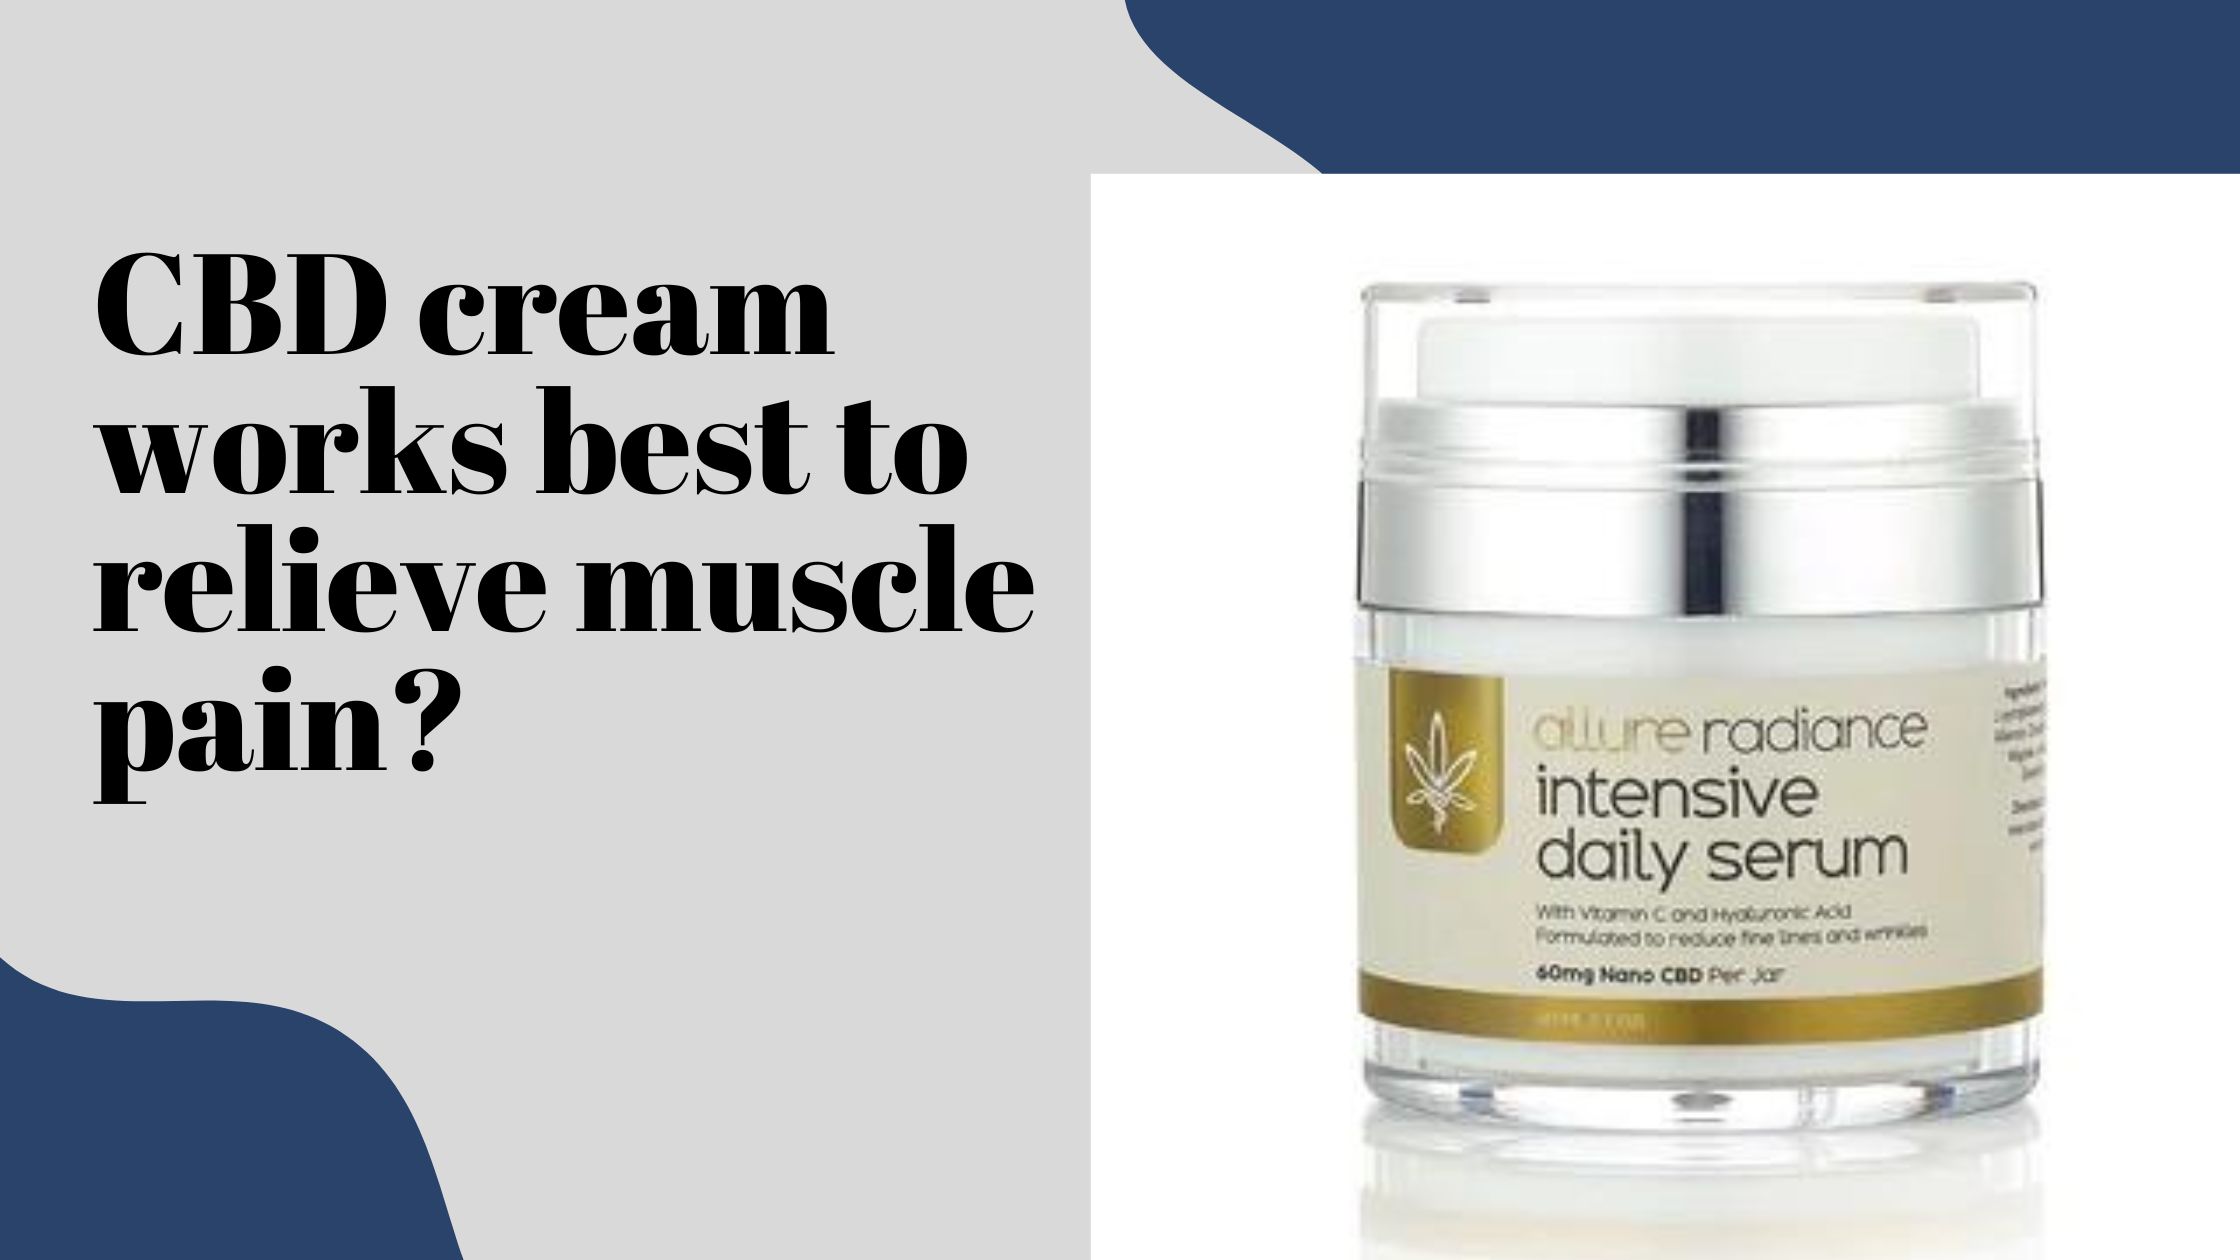 Which CBD cream works best to relieve muscle pain